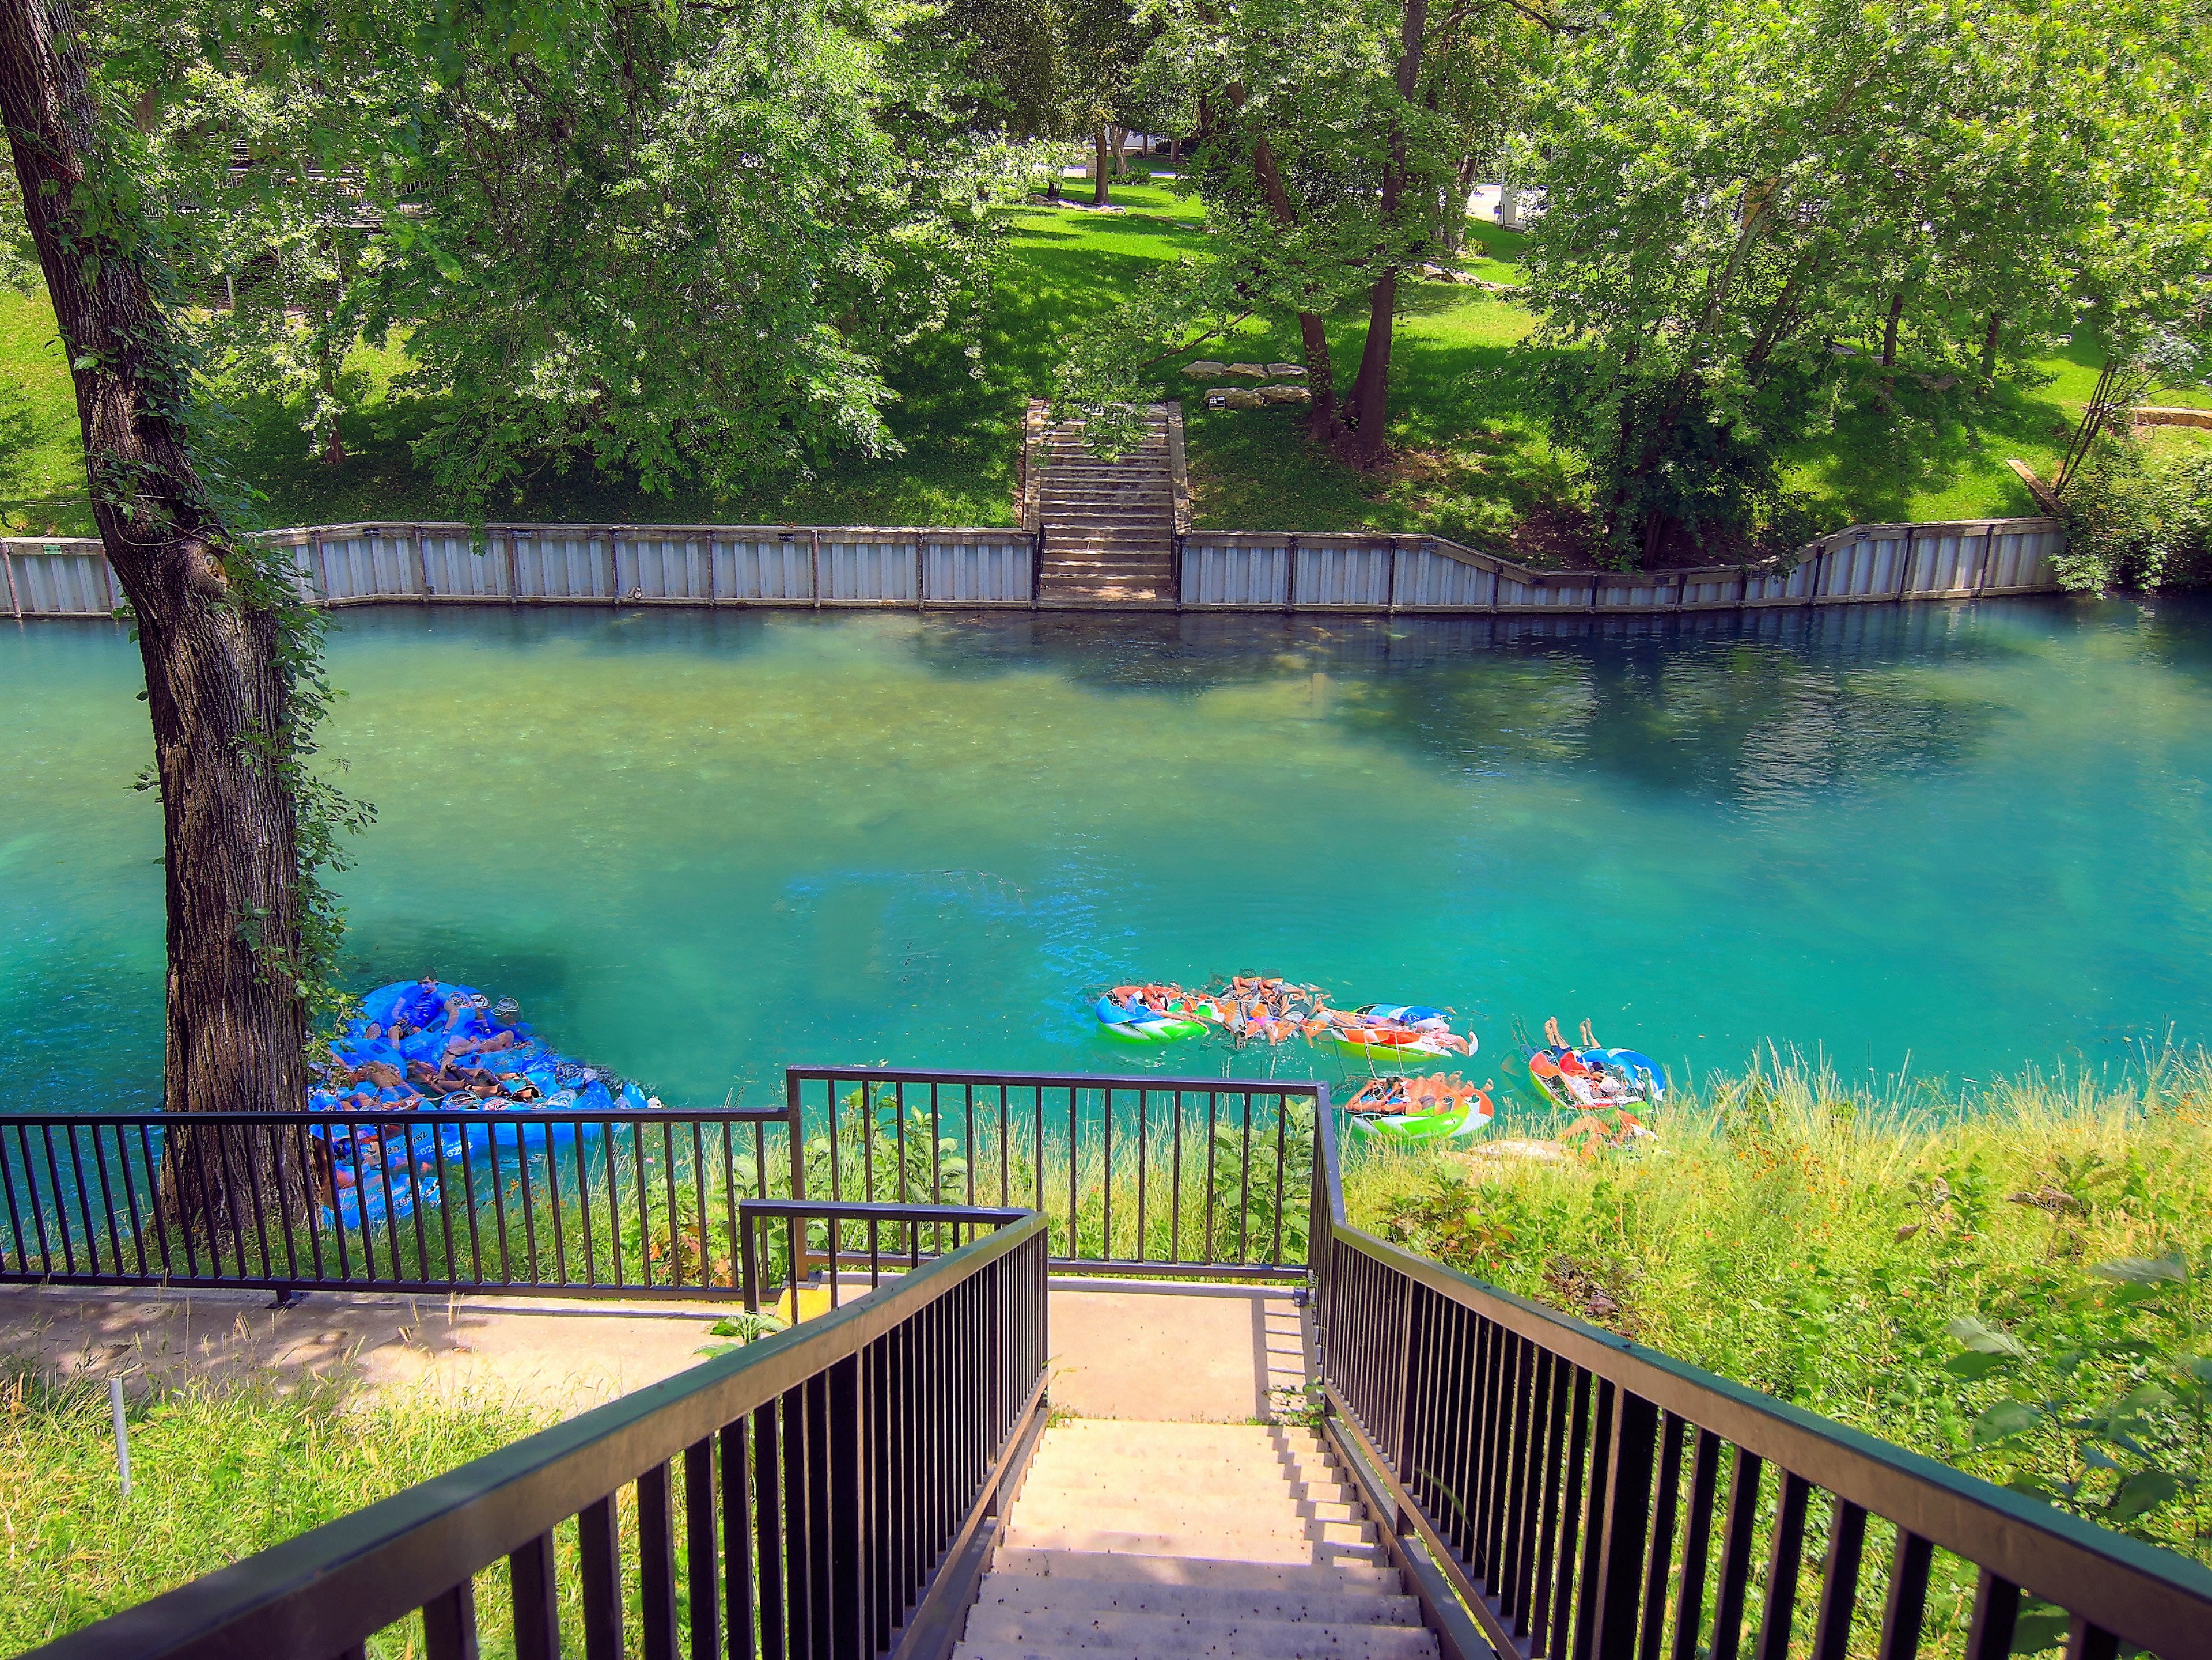 New Braunfels 82 - Vacation rentals in New Braunfels on the river